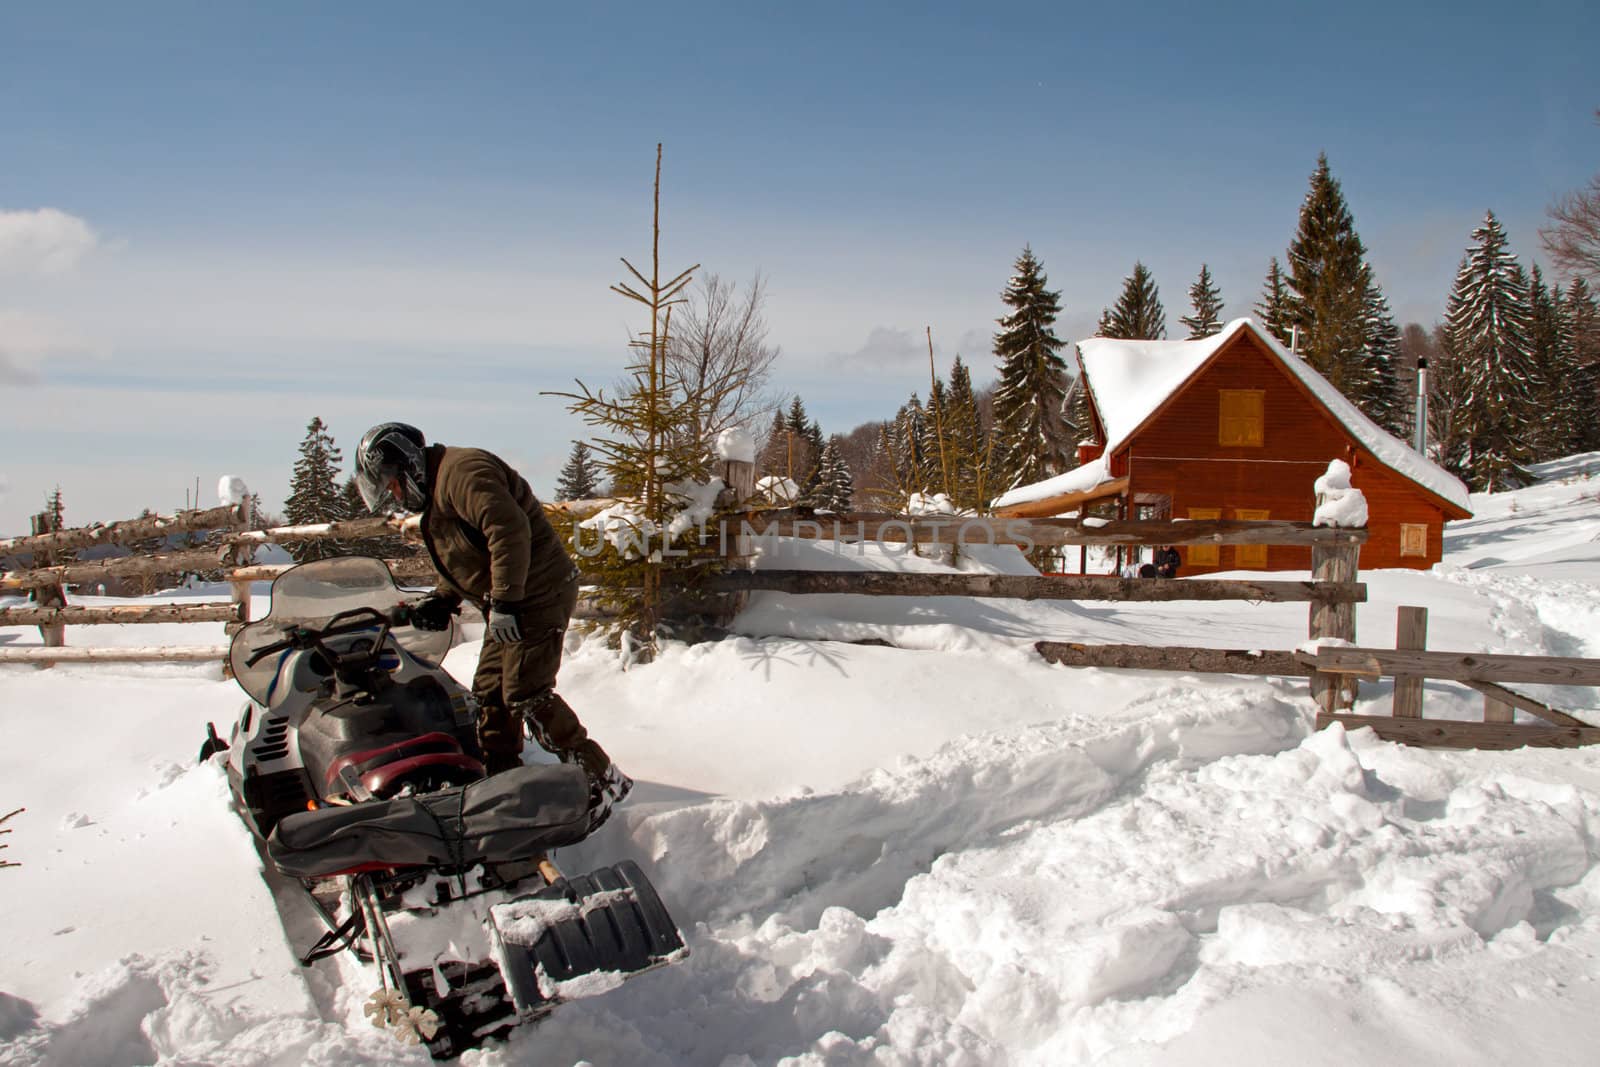 A man is preparing to ride on a snowmobile